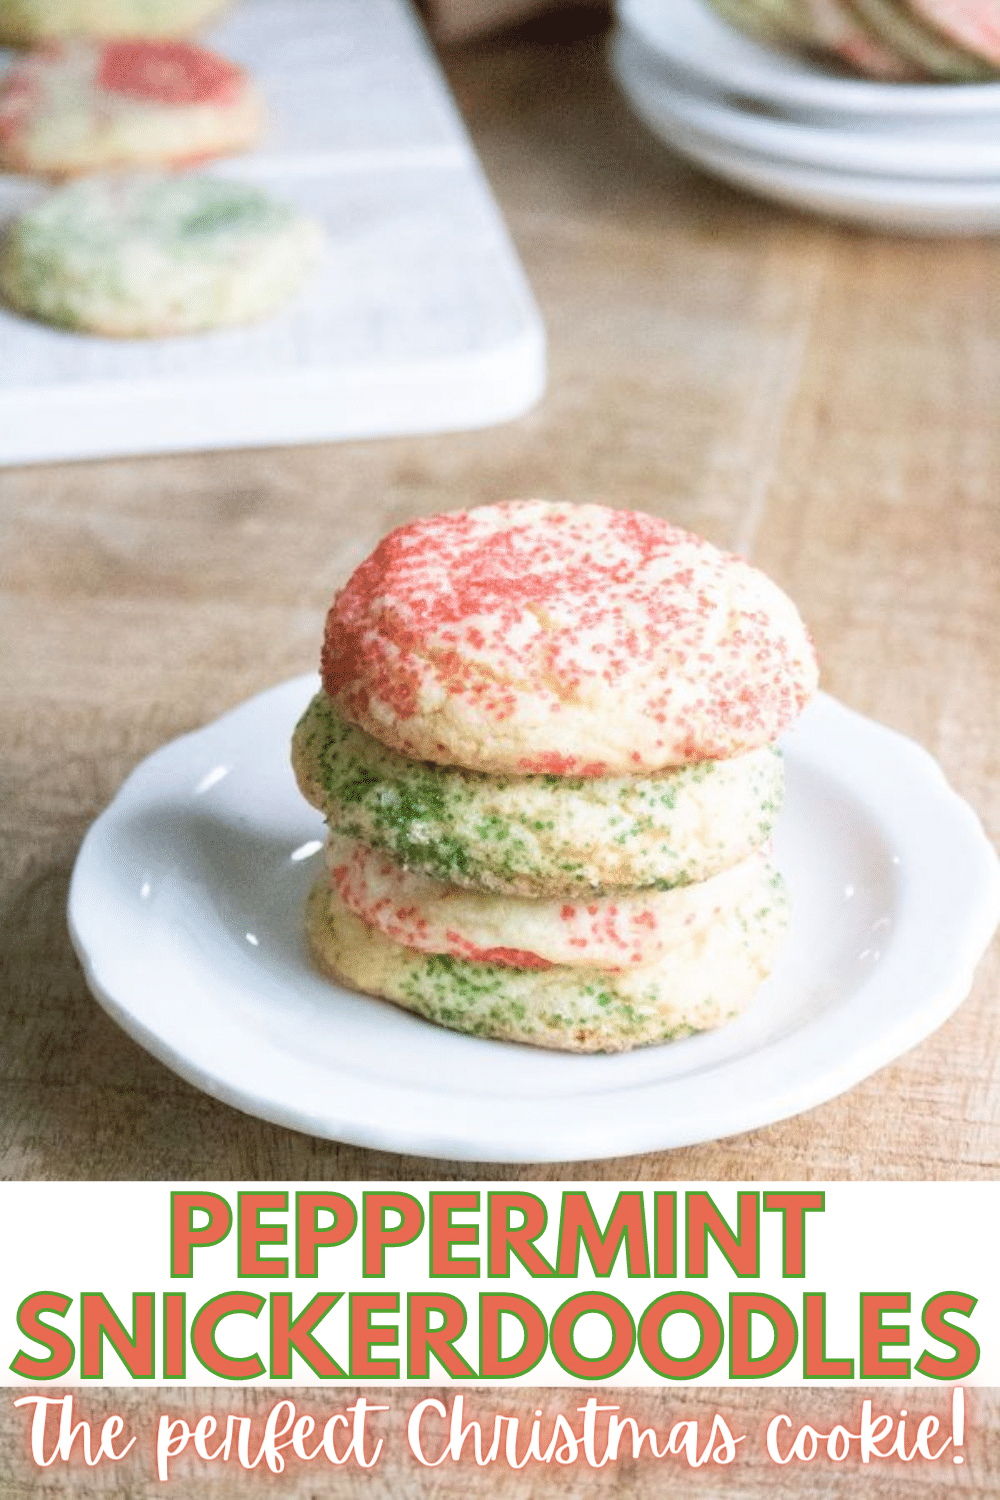 Peppermint Snickerdoodles are a delicious cookie treat that is perfect for Christmas and cookie exchanges. These easy cookies are beautiful on a platter. #snickerdoodles #cookies #christmascookies via @wondermomwannab